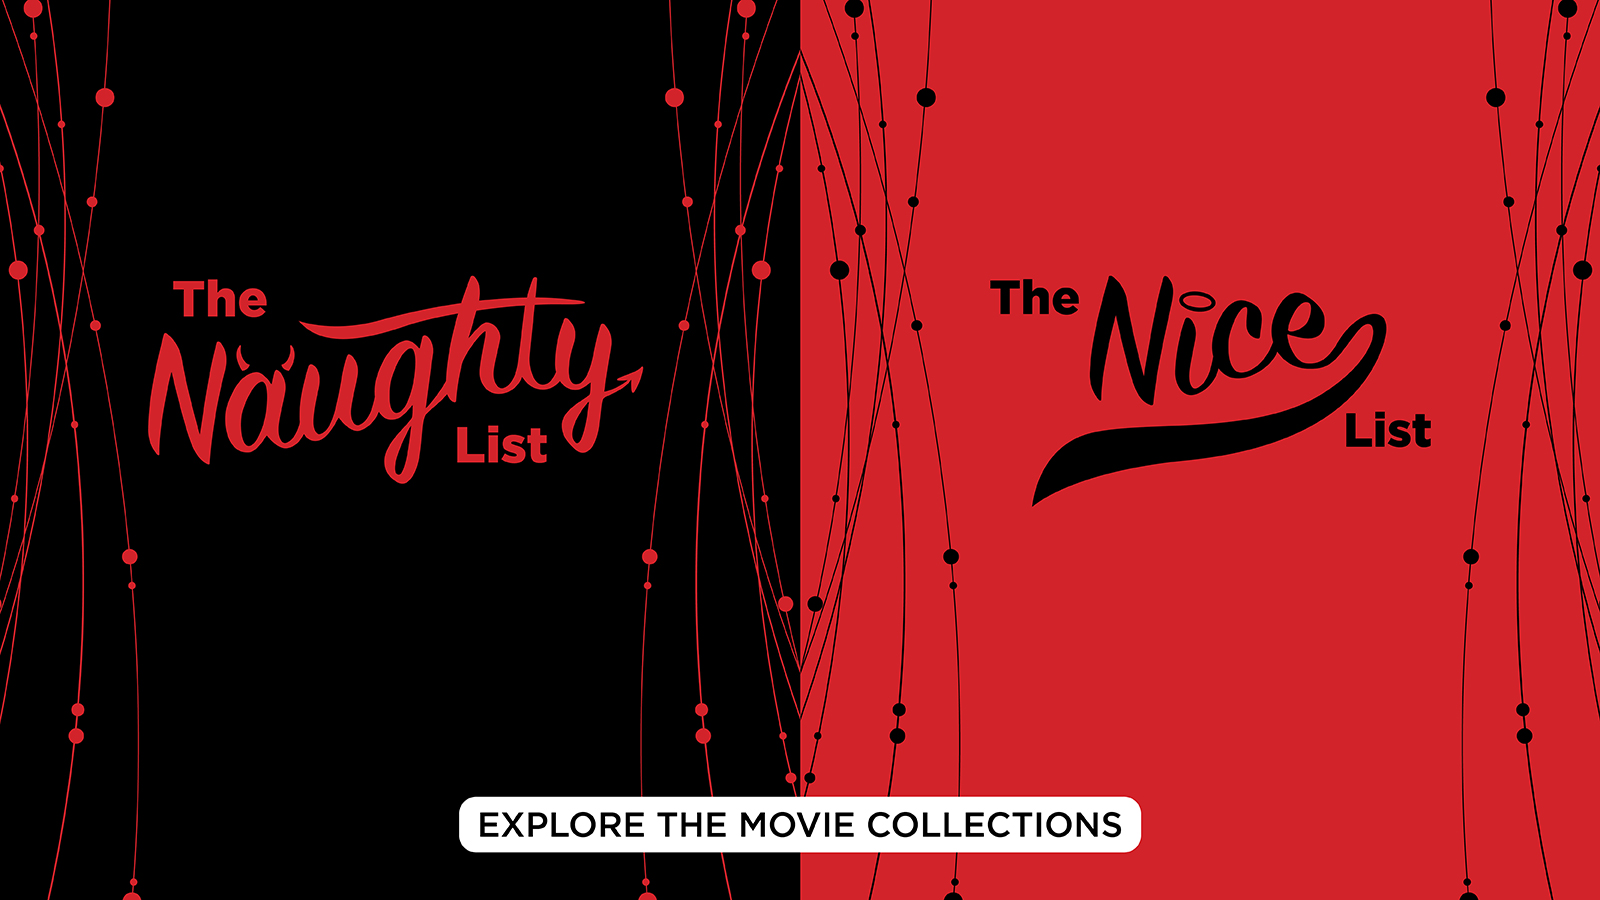 The Nice List/The Naughty List – Explore the Movie Collections